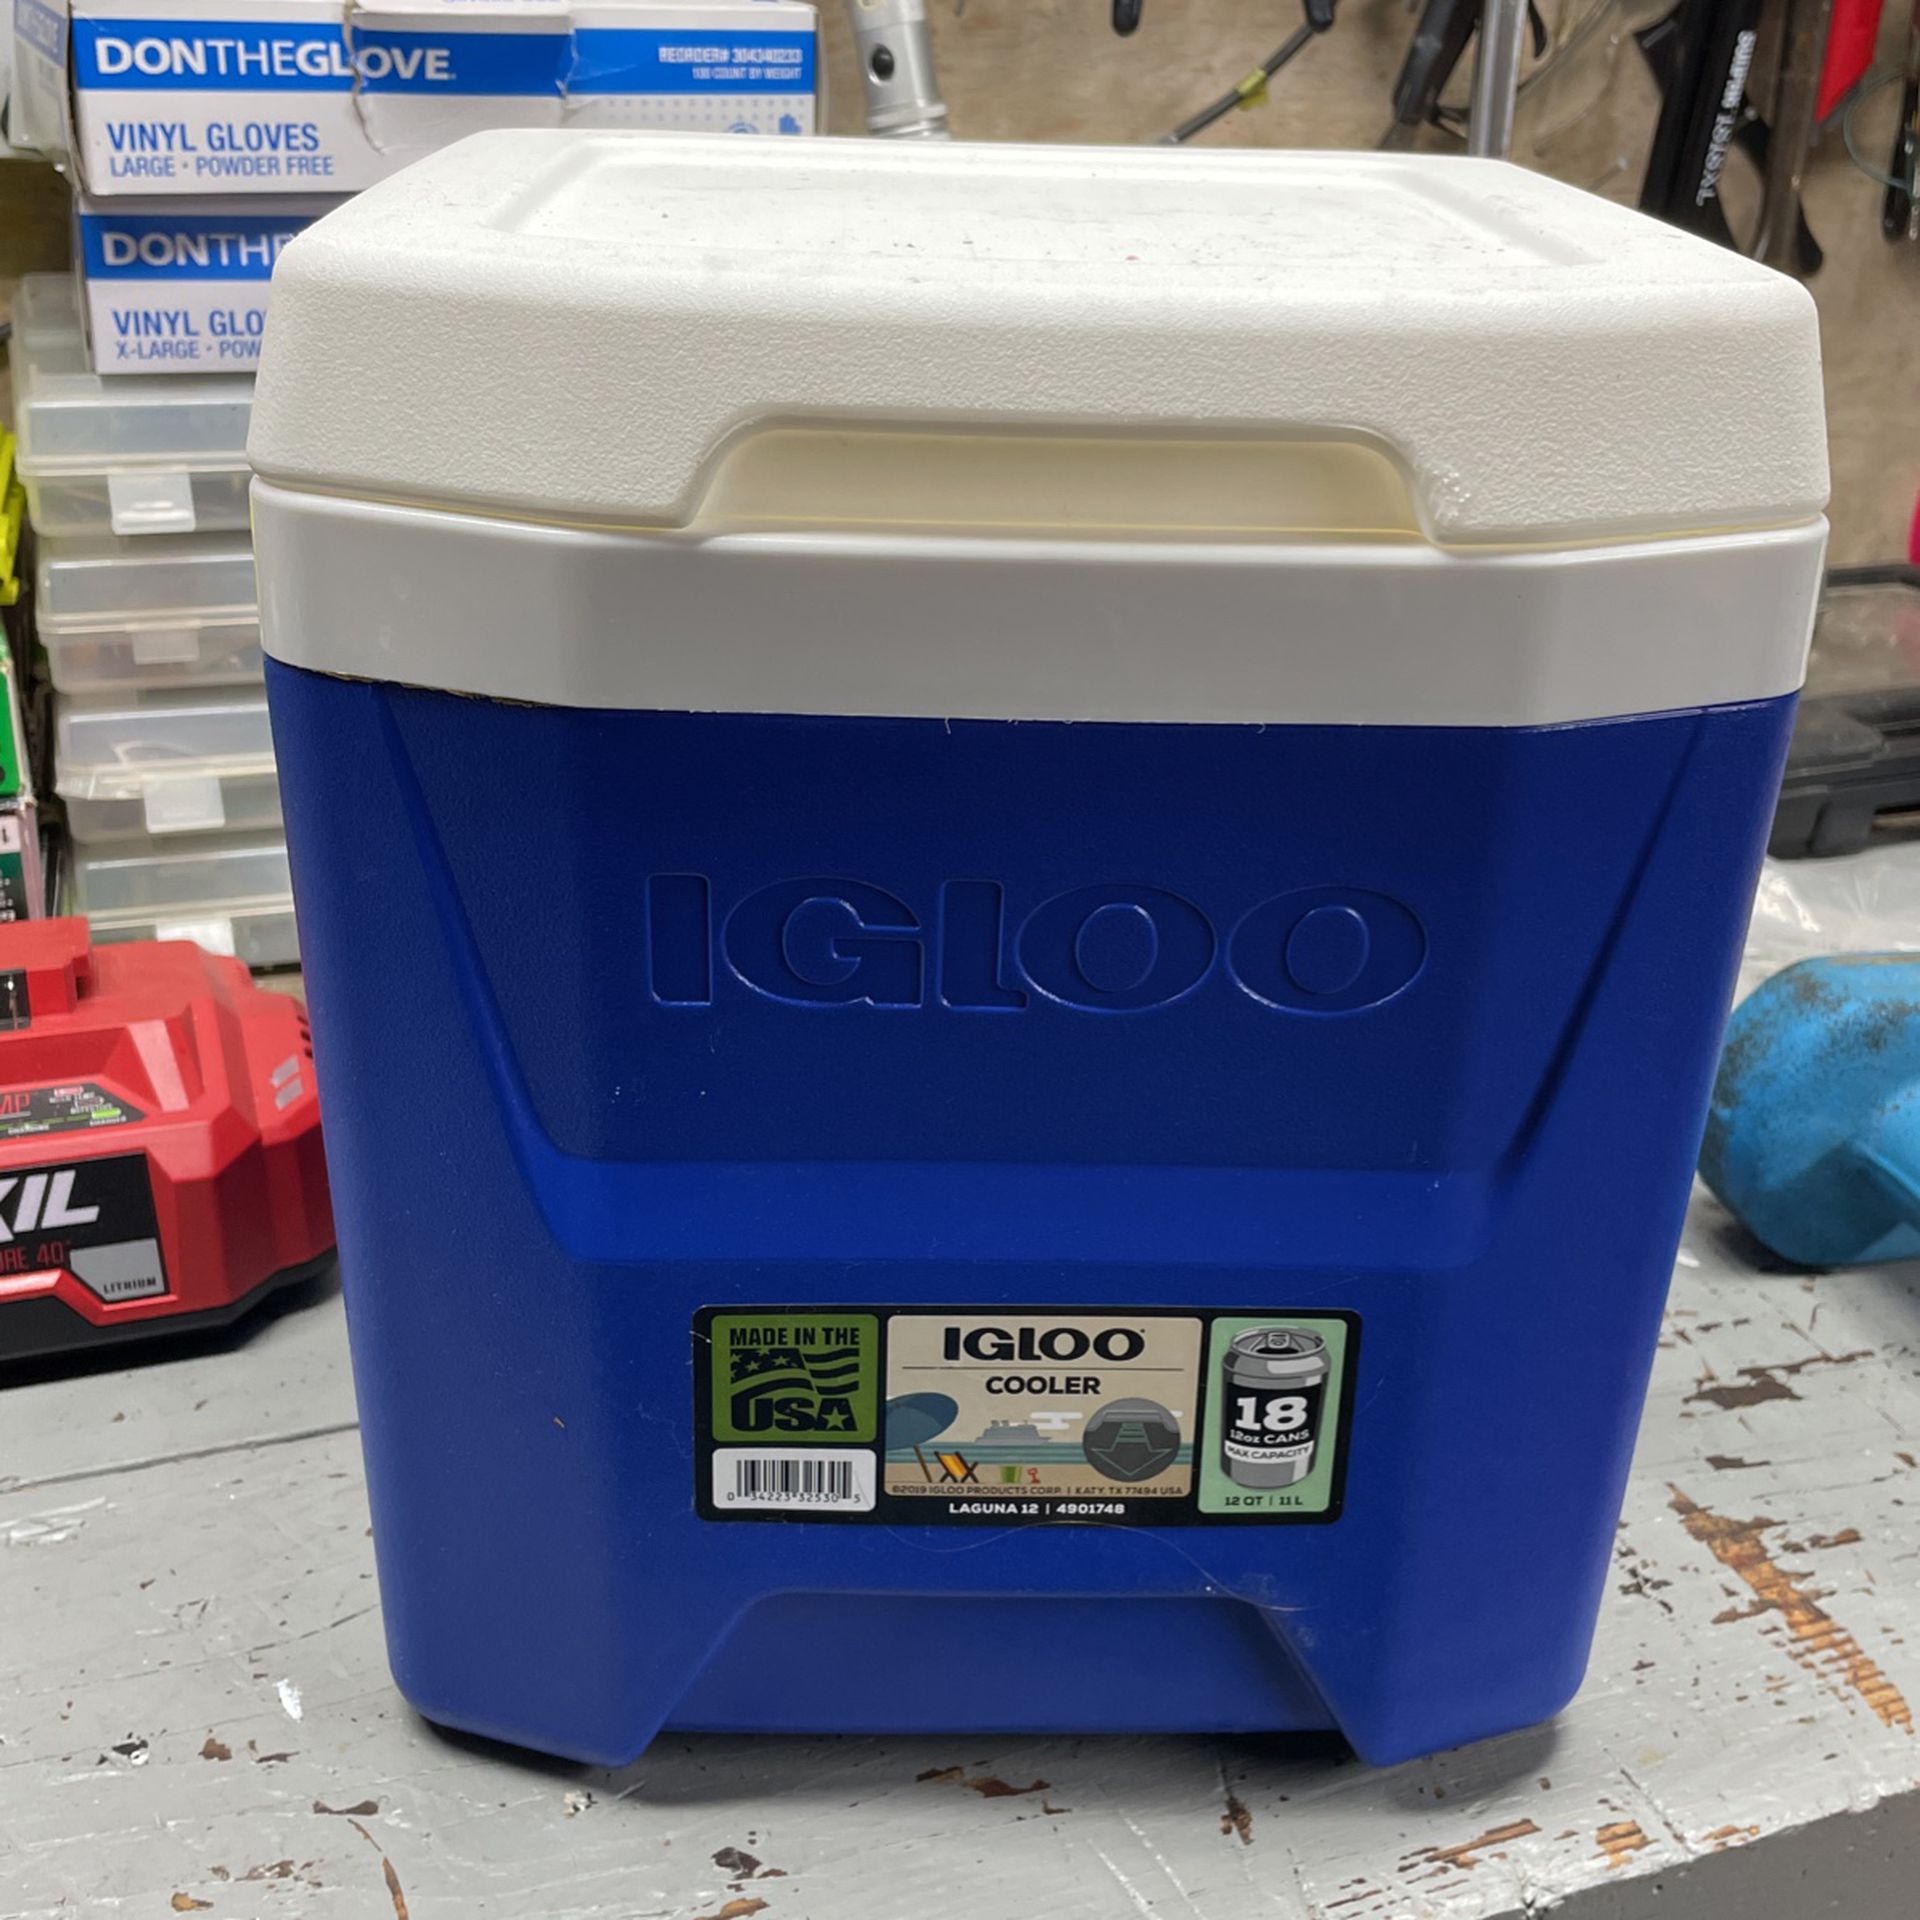 Igloo Cooler Holds 18 Cans 